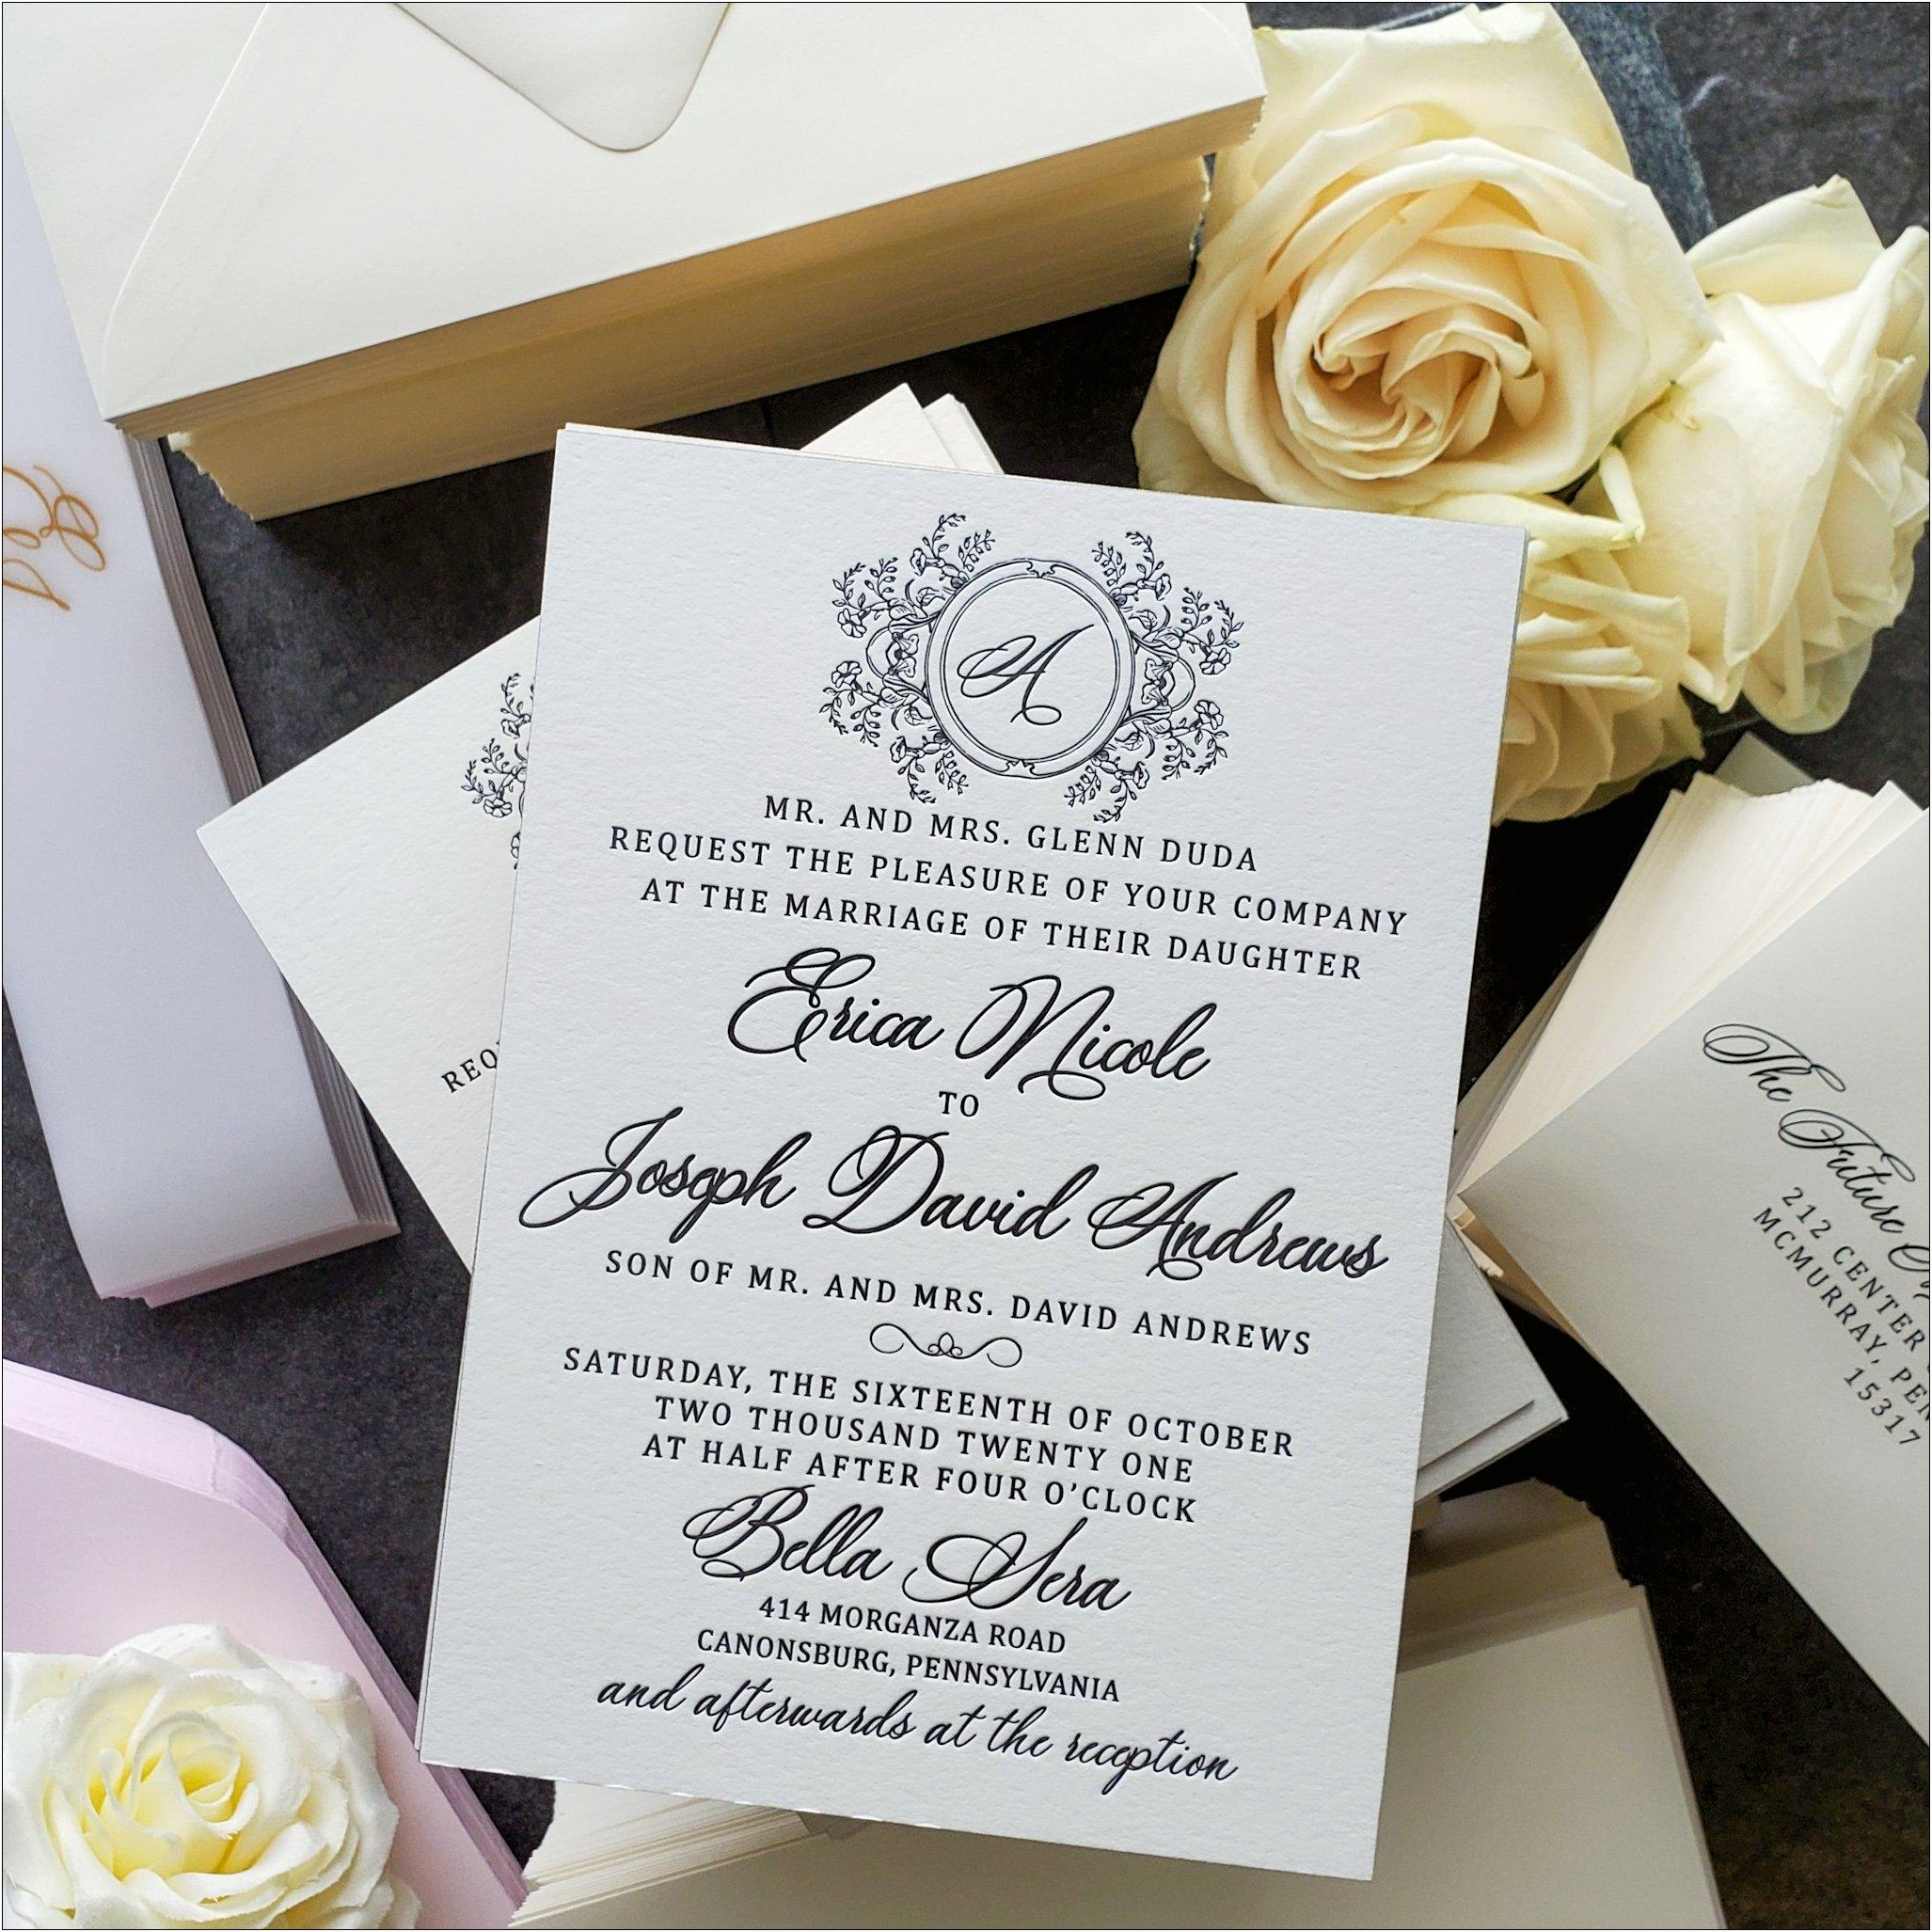 Average Cost Of Wedding Invitations In Philippines